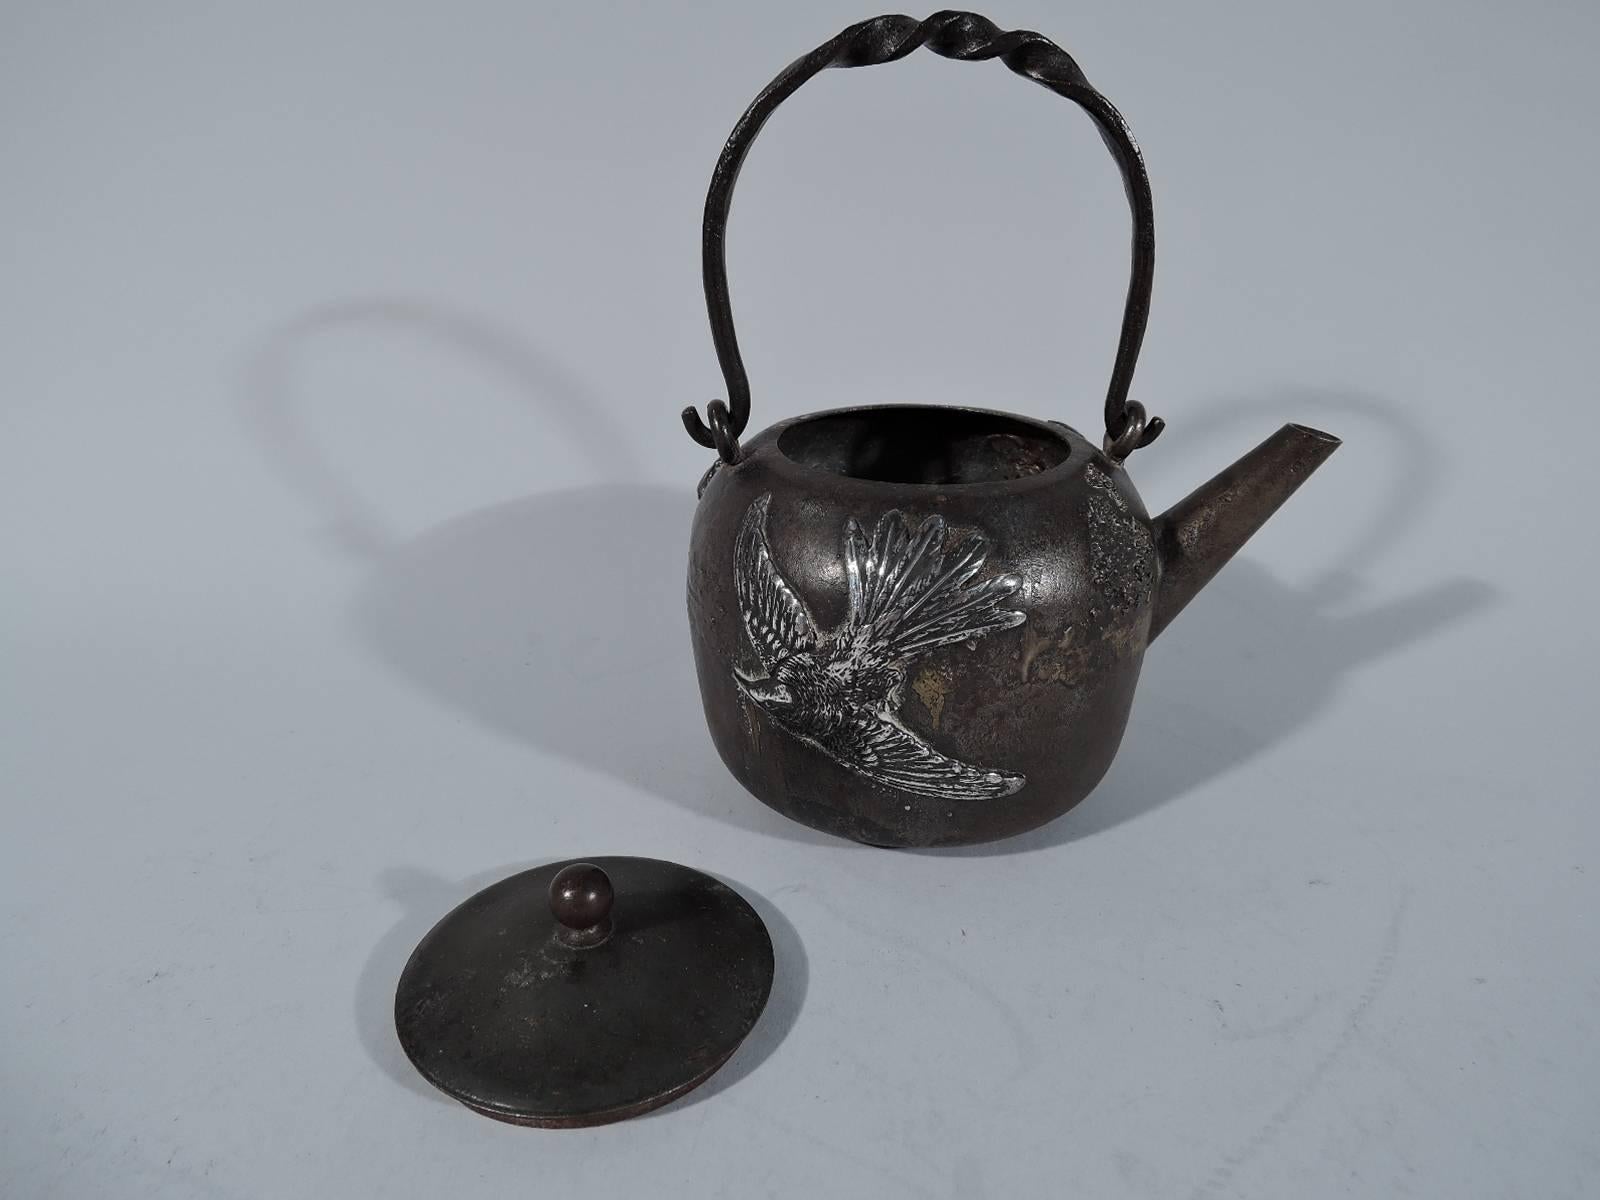 Japonisme Rare Japonesque Mixed Metal Iron and Sterling Silver Teapot by Gorham